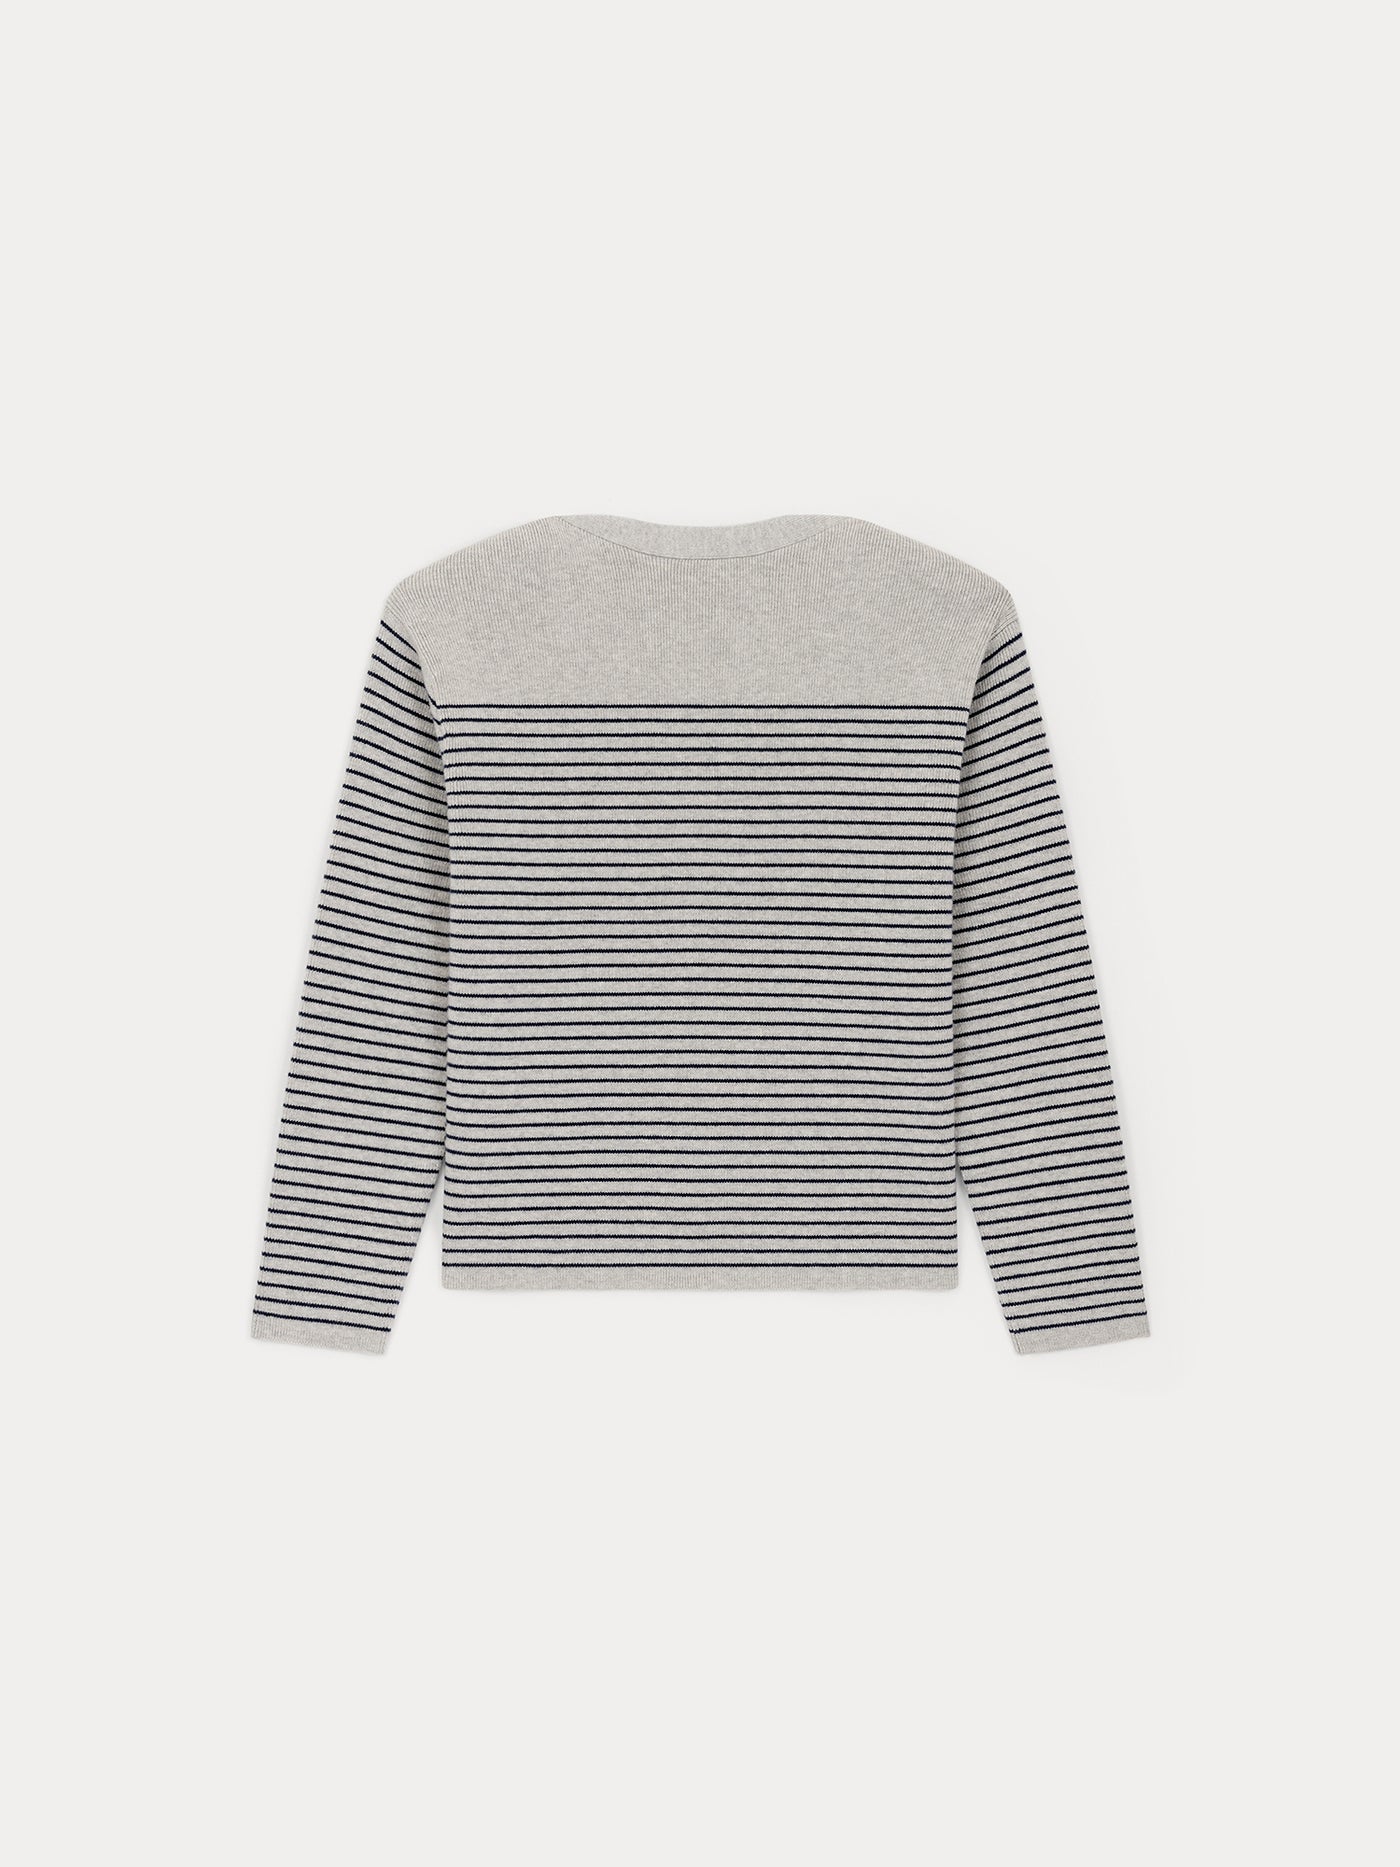 Gray sailor sweater in wool and cotton with navy stripes